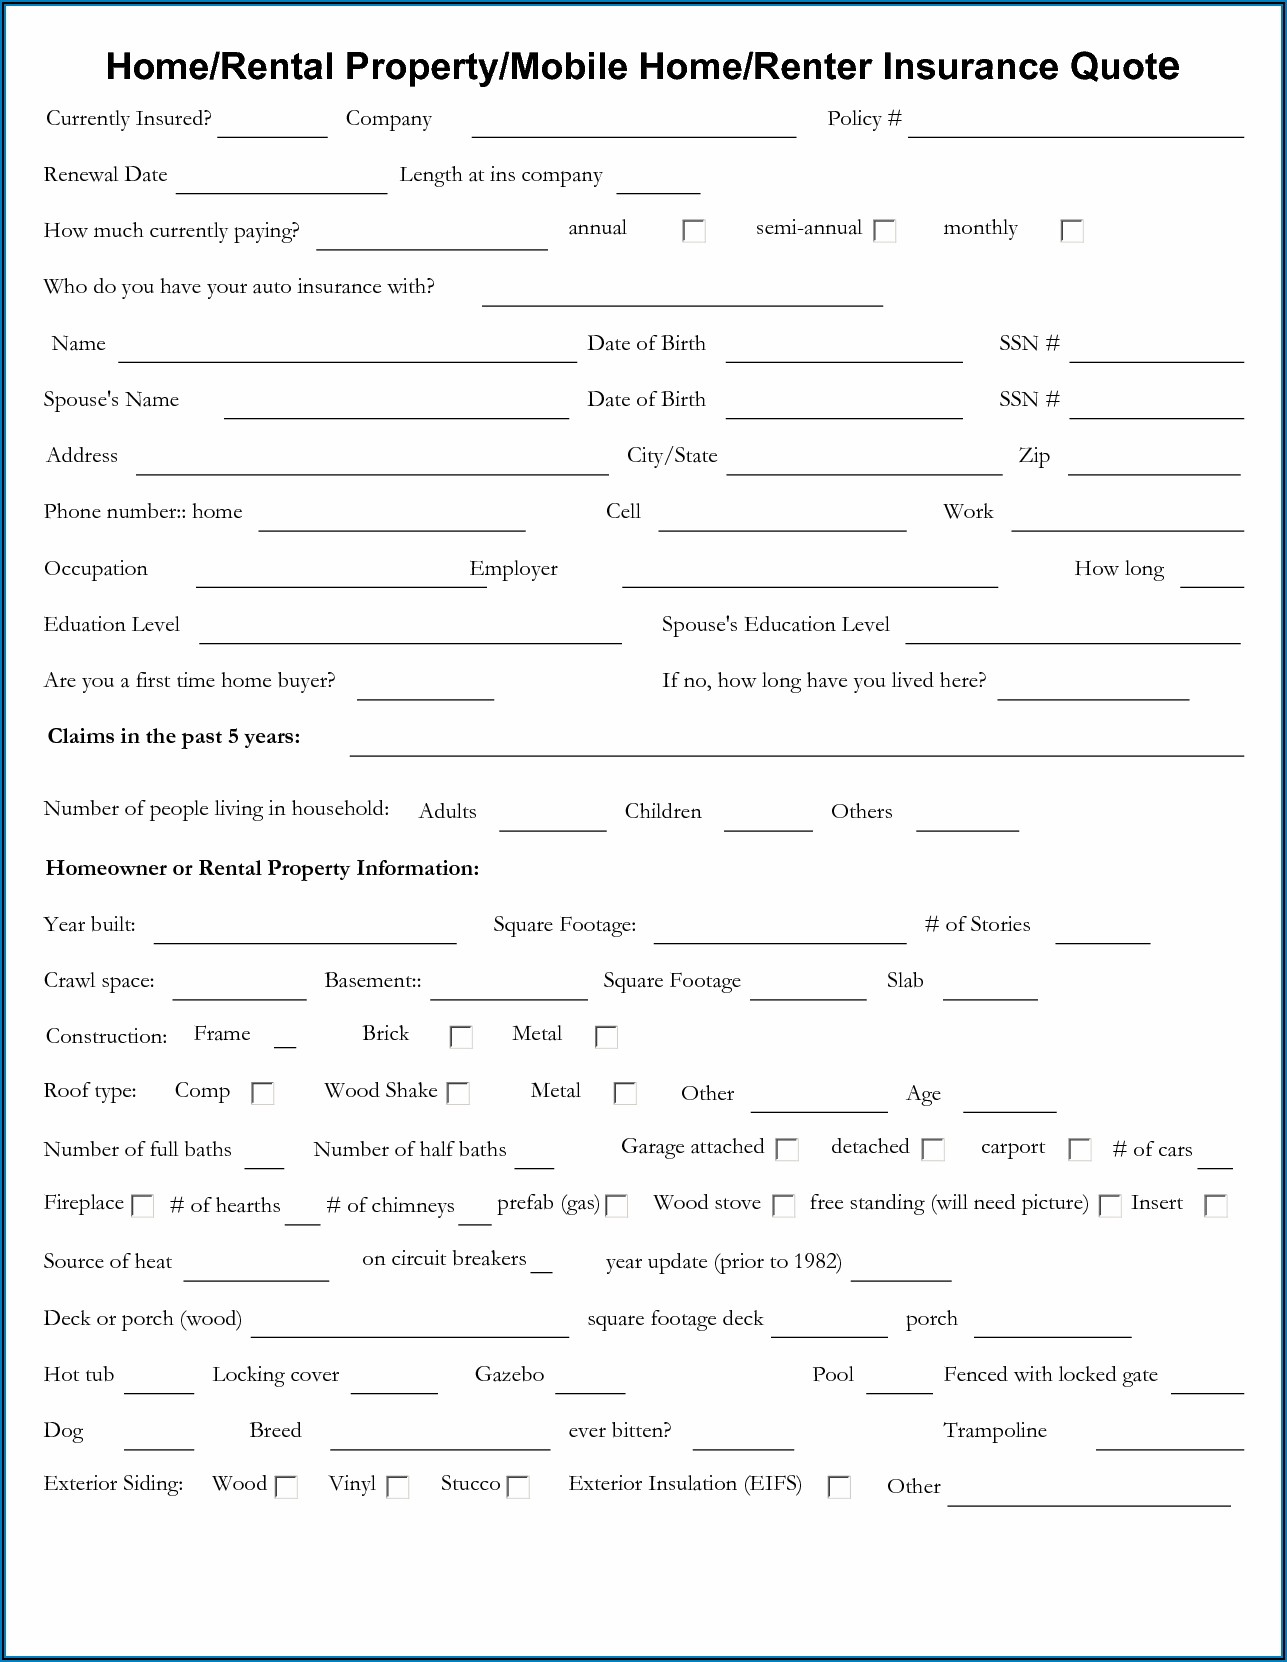 Life Insurance Quote Sheet Template